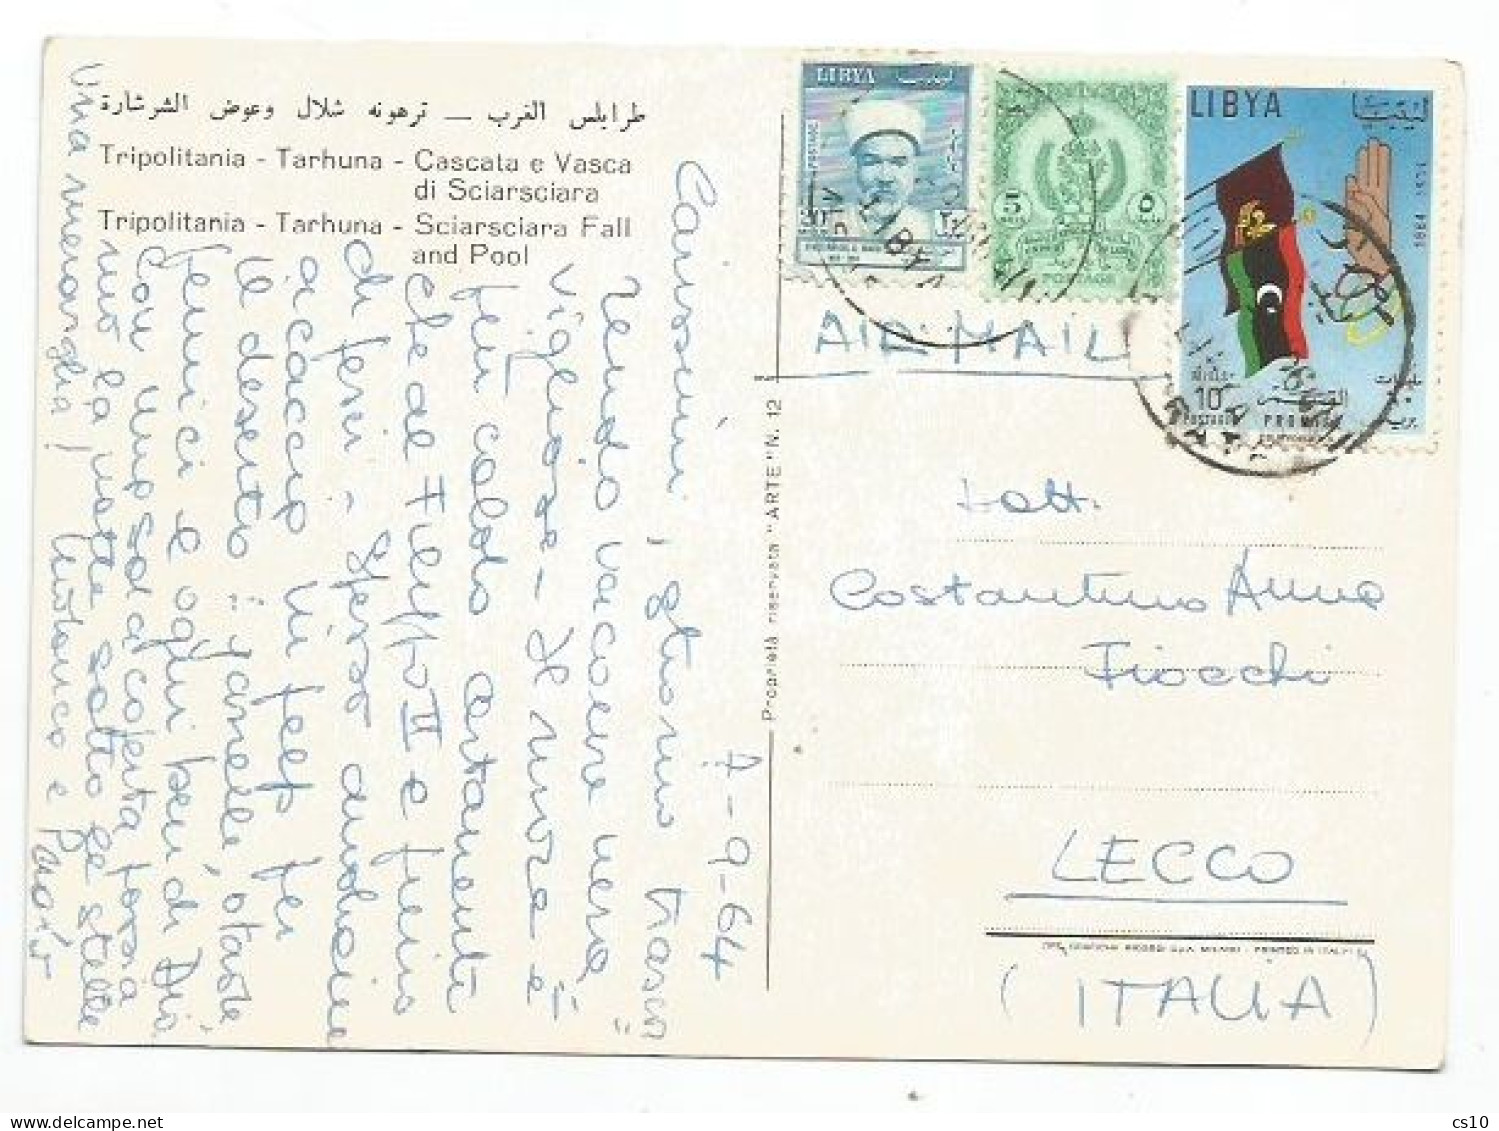 Libya 1962 Boy Scout Meeting 10m Value + Other Pcard Sciarsciara Fall & Pool 7sep1964 X Italy - Covers & Documents